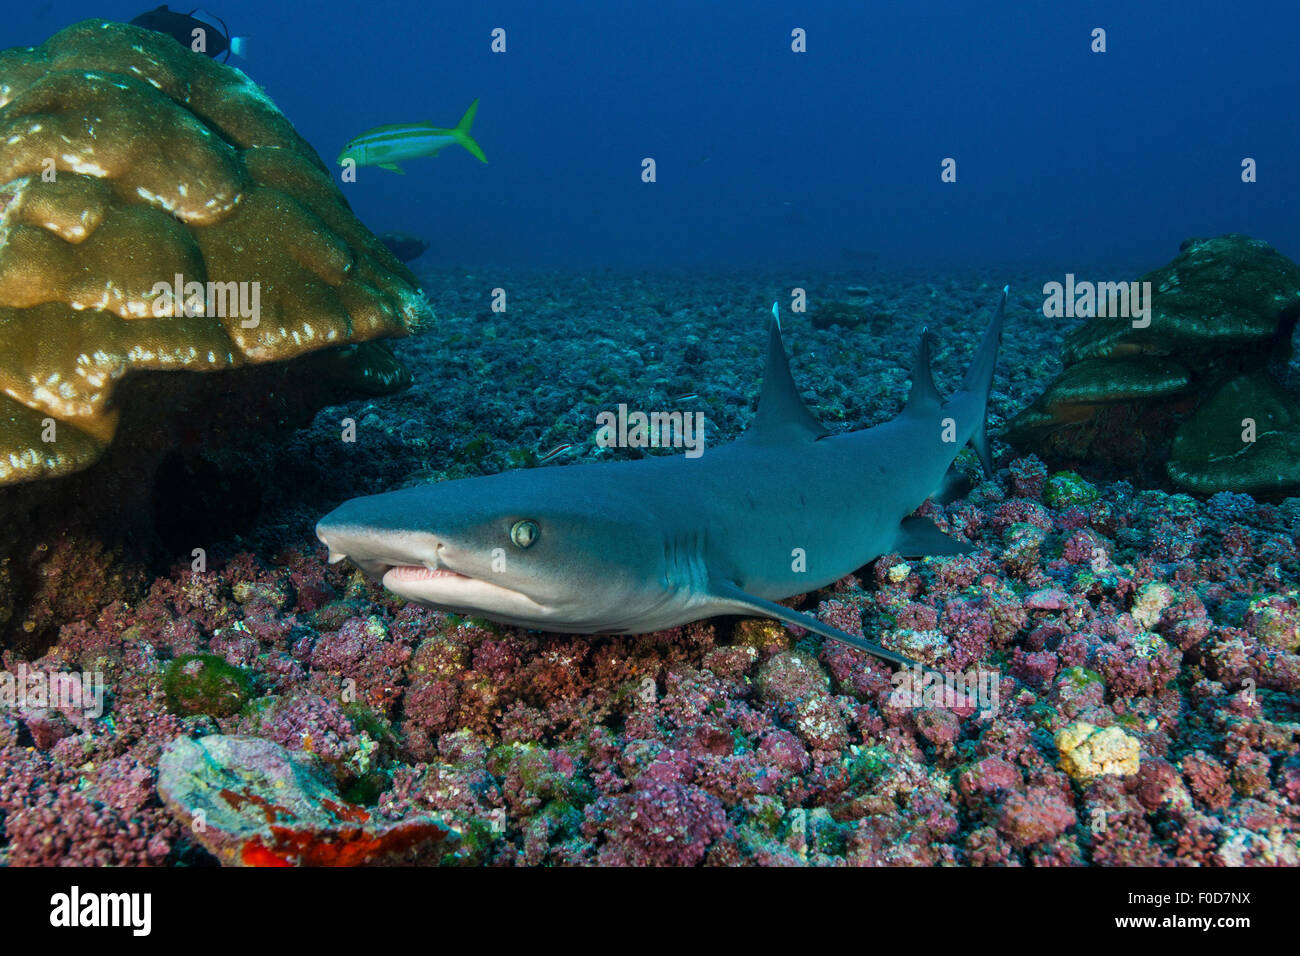 Resting whitetip reef shark over field of pink porites coral, Cocos Island, Costa Rica. Stock Photo